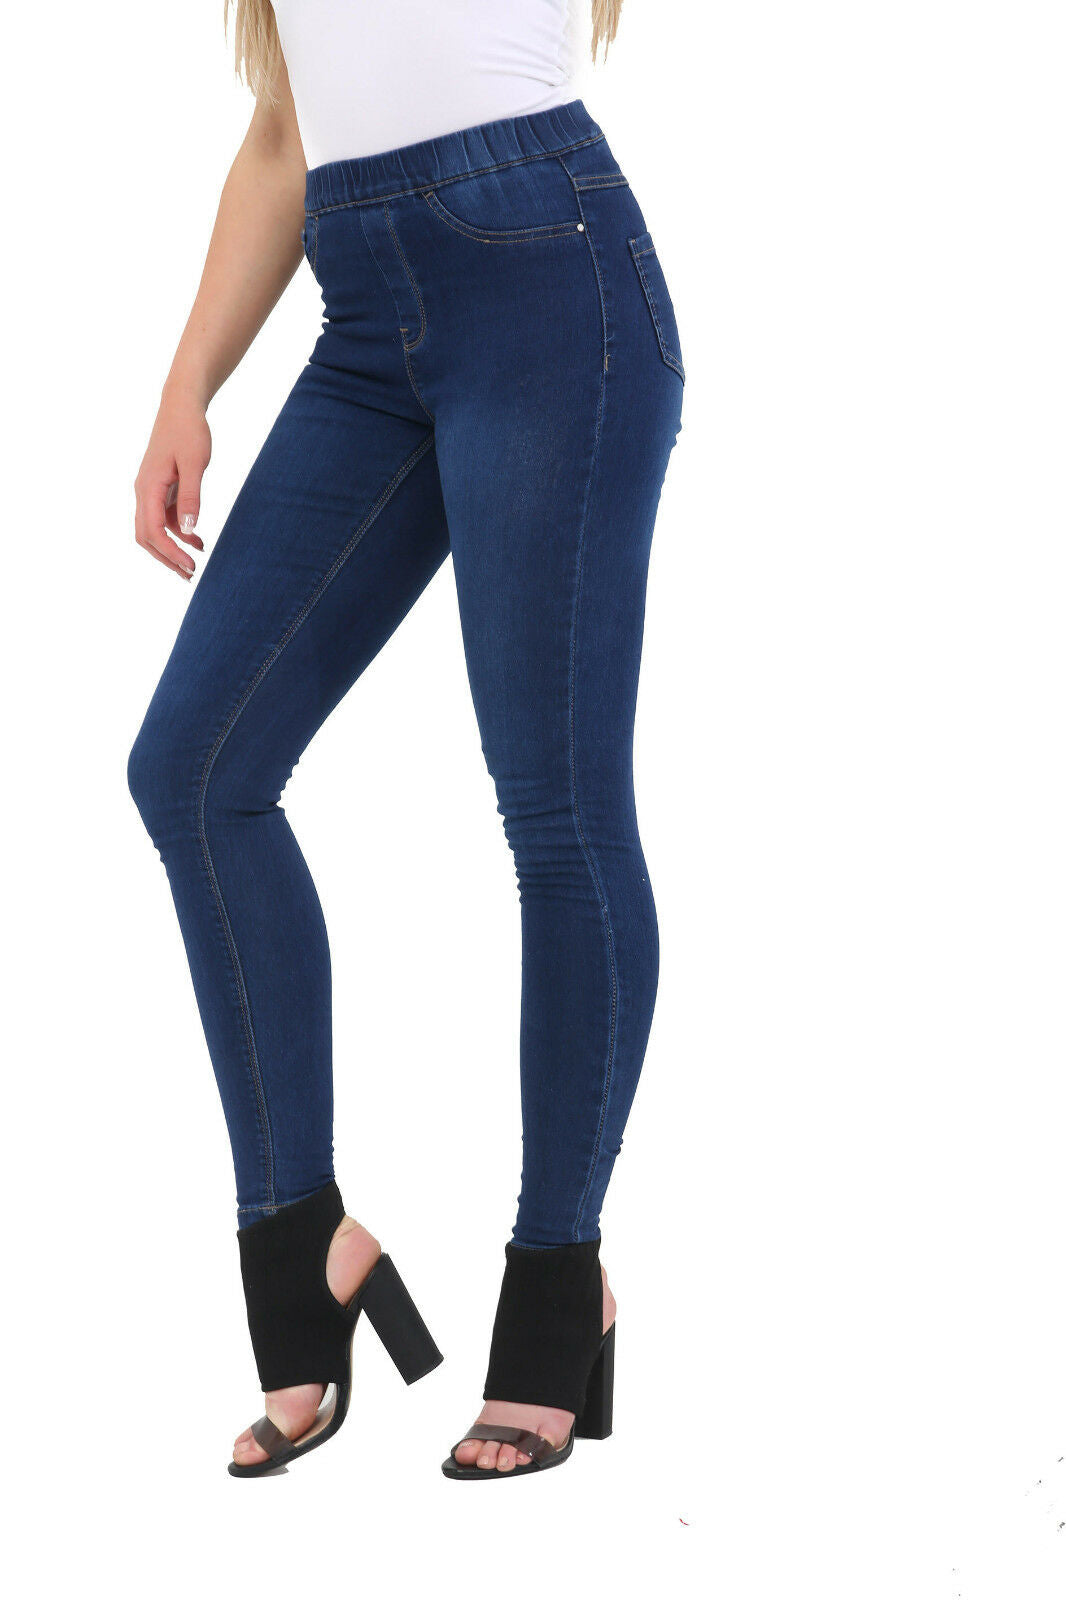 Ladies Dark Blue Denim Jeggings. These Have An Elasticated Waist And Are A Stretchy Fit. Sizes Available Are 8-18.